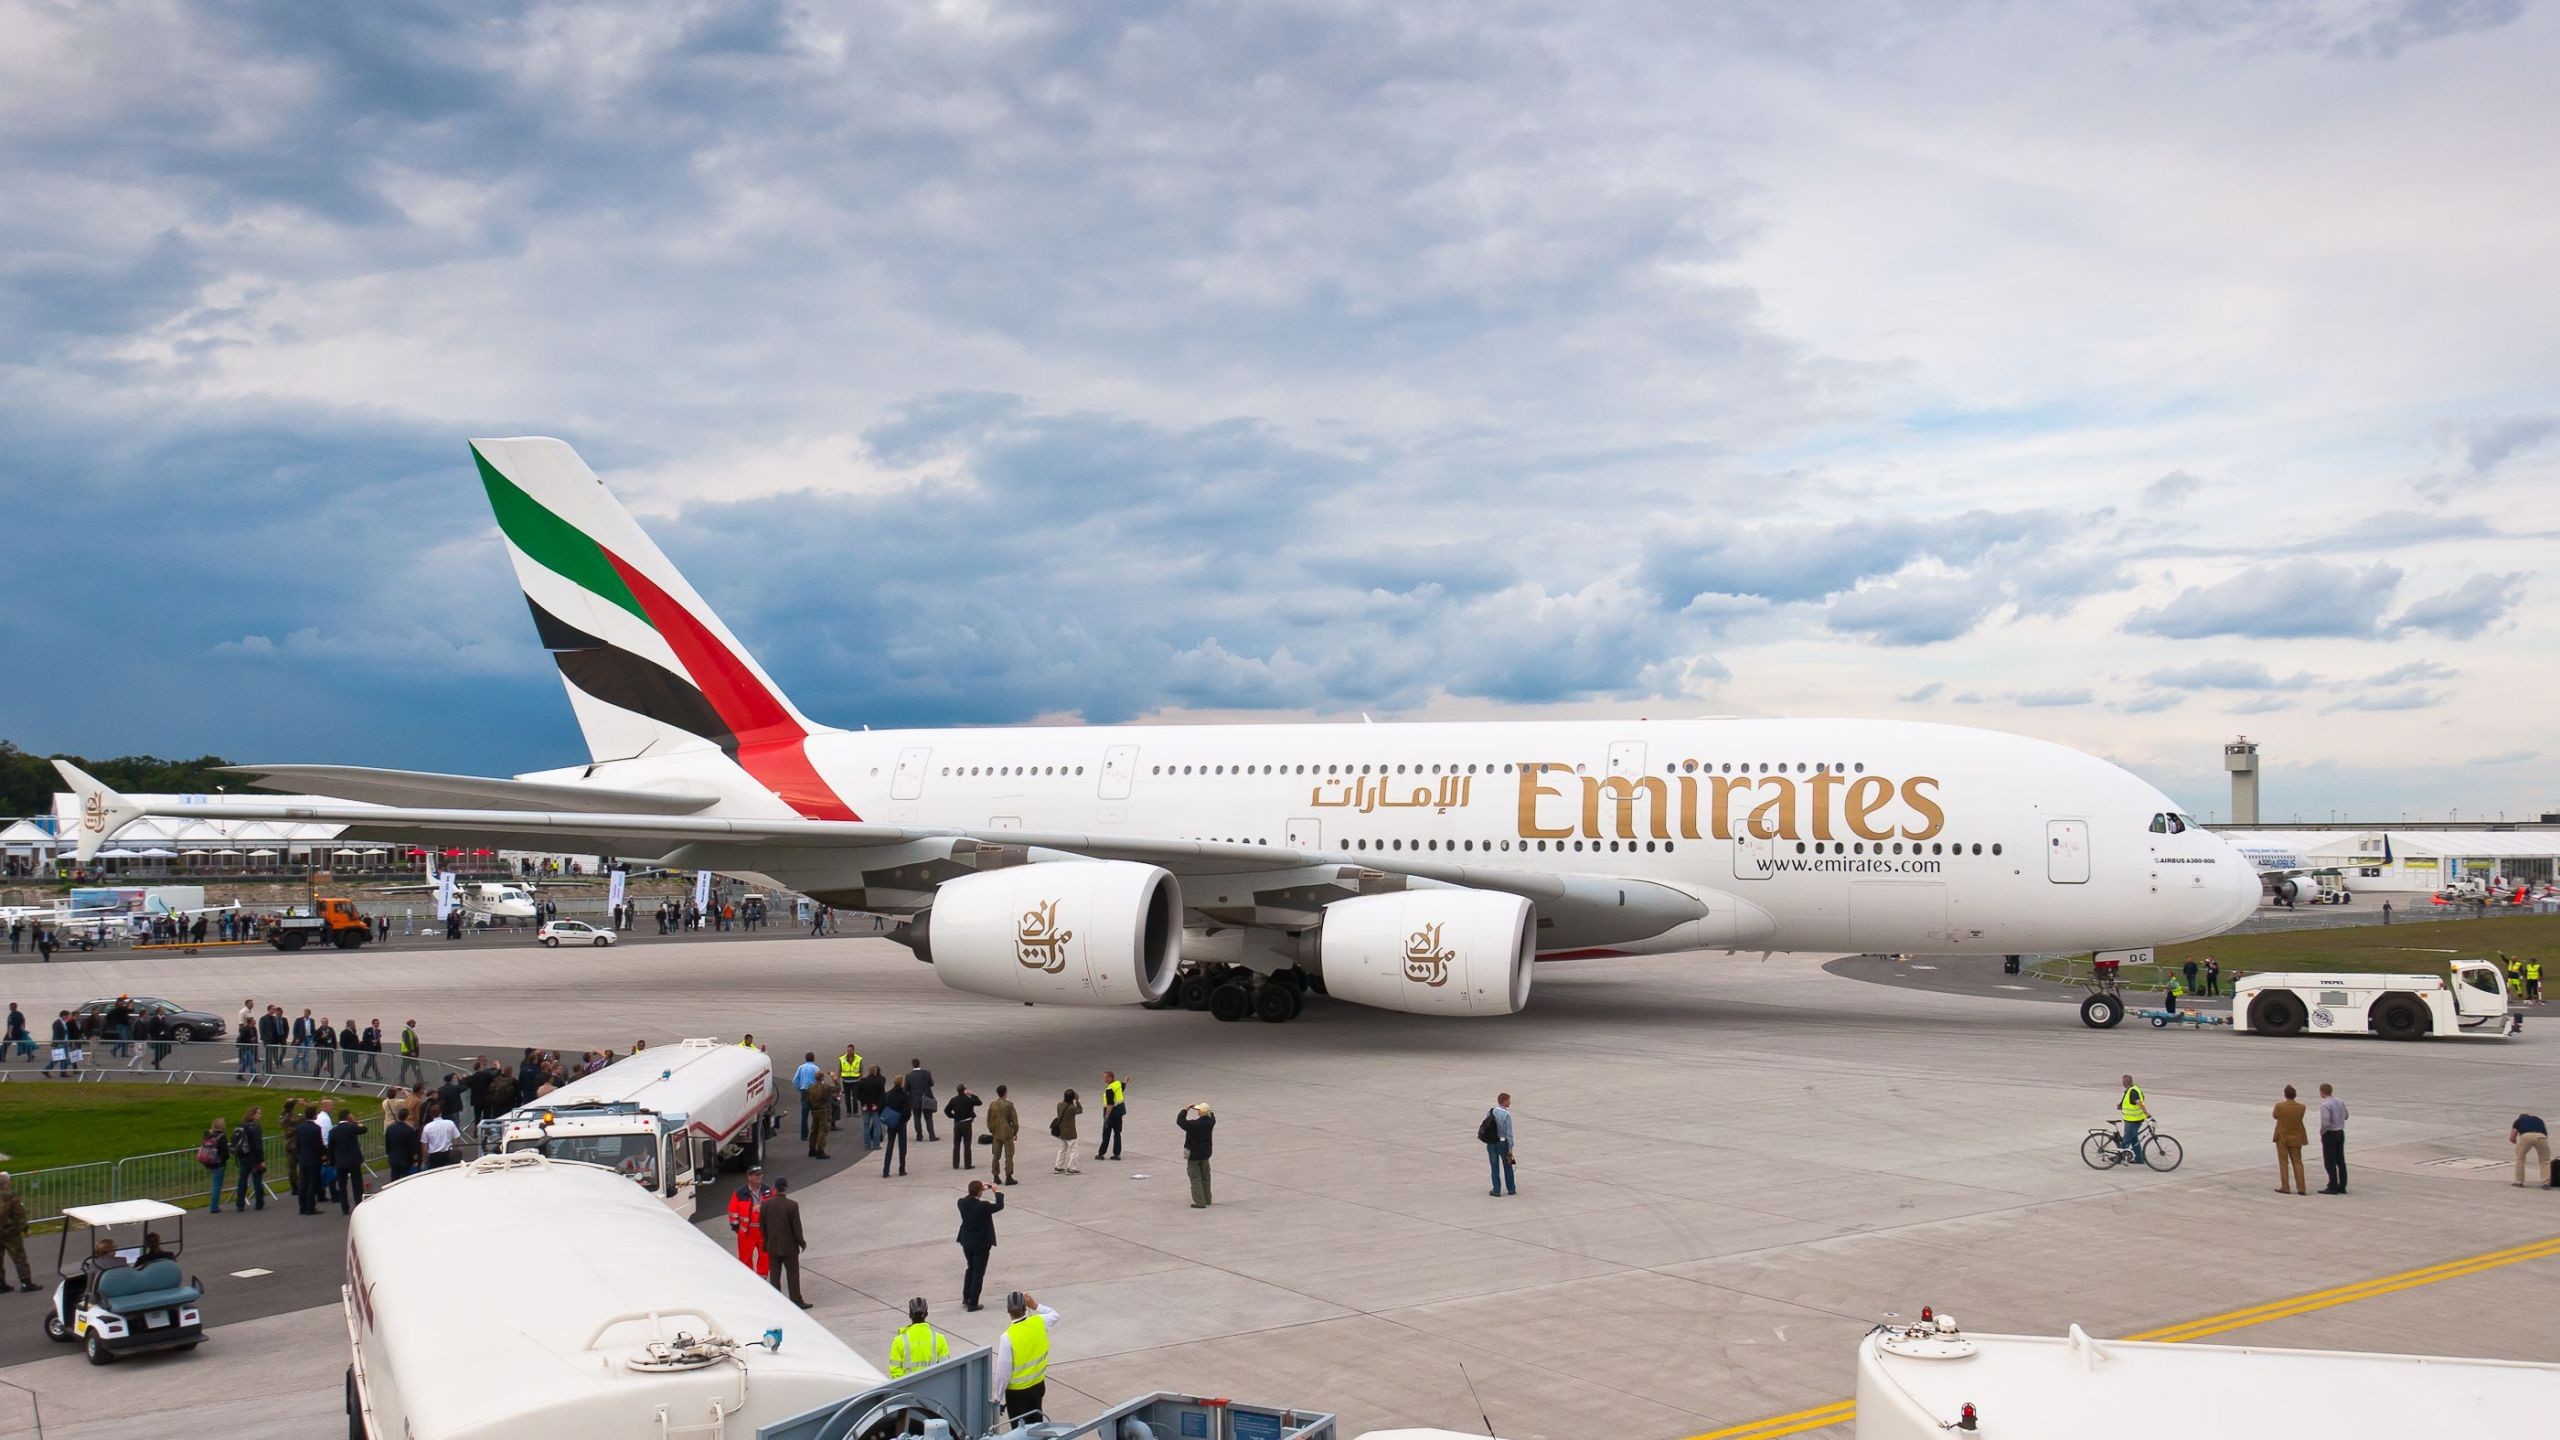 Cool Wallpapers vehicles, airbus a380, airplane, emirates, passenger plane, aircraft